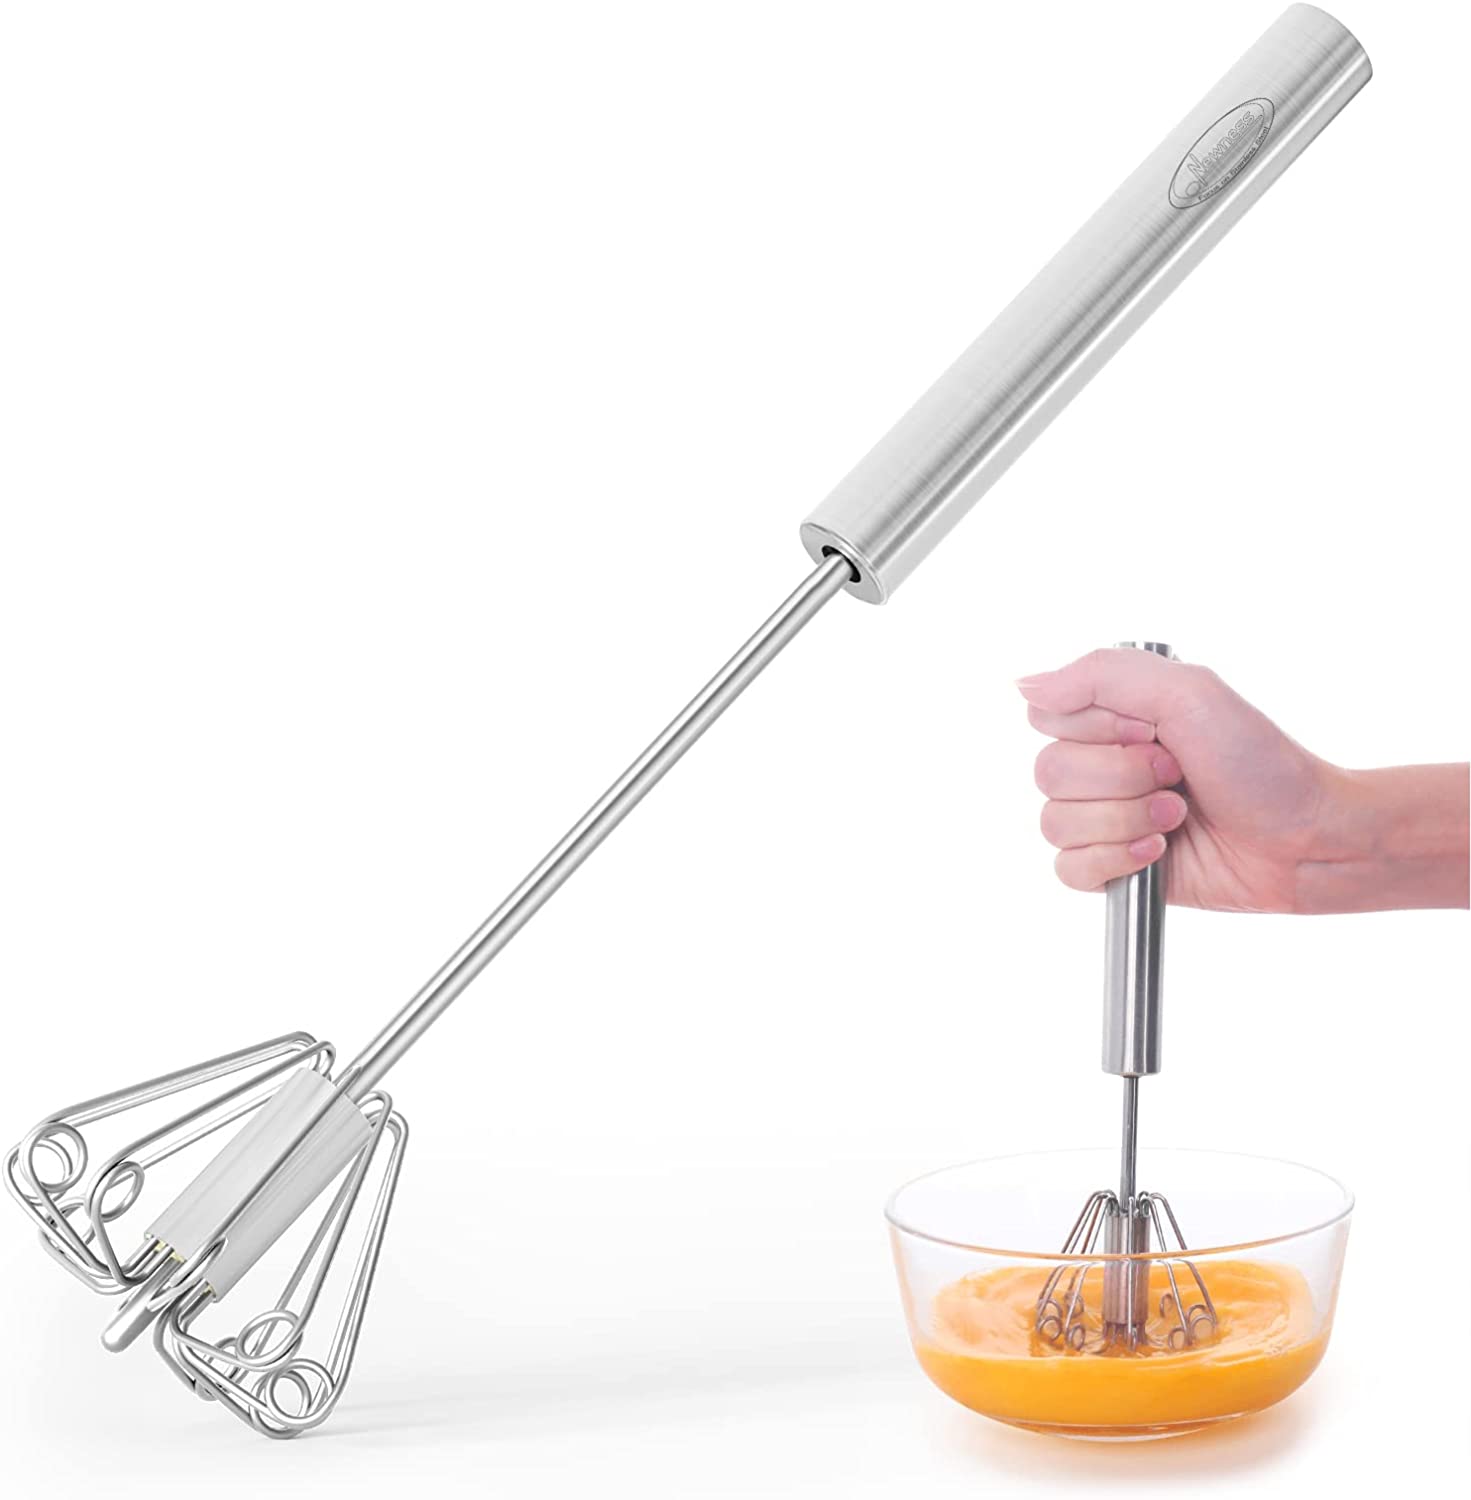 Best Manual (Non-Electric) Hand Mixer for Thrifty Bakers - Baking